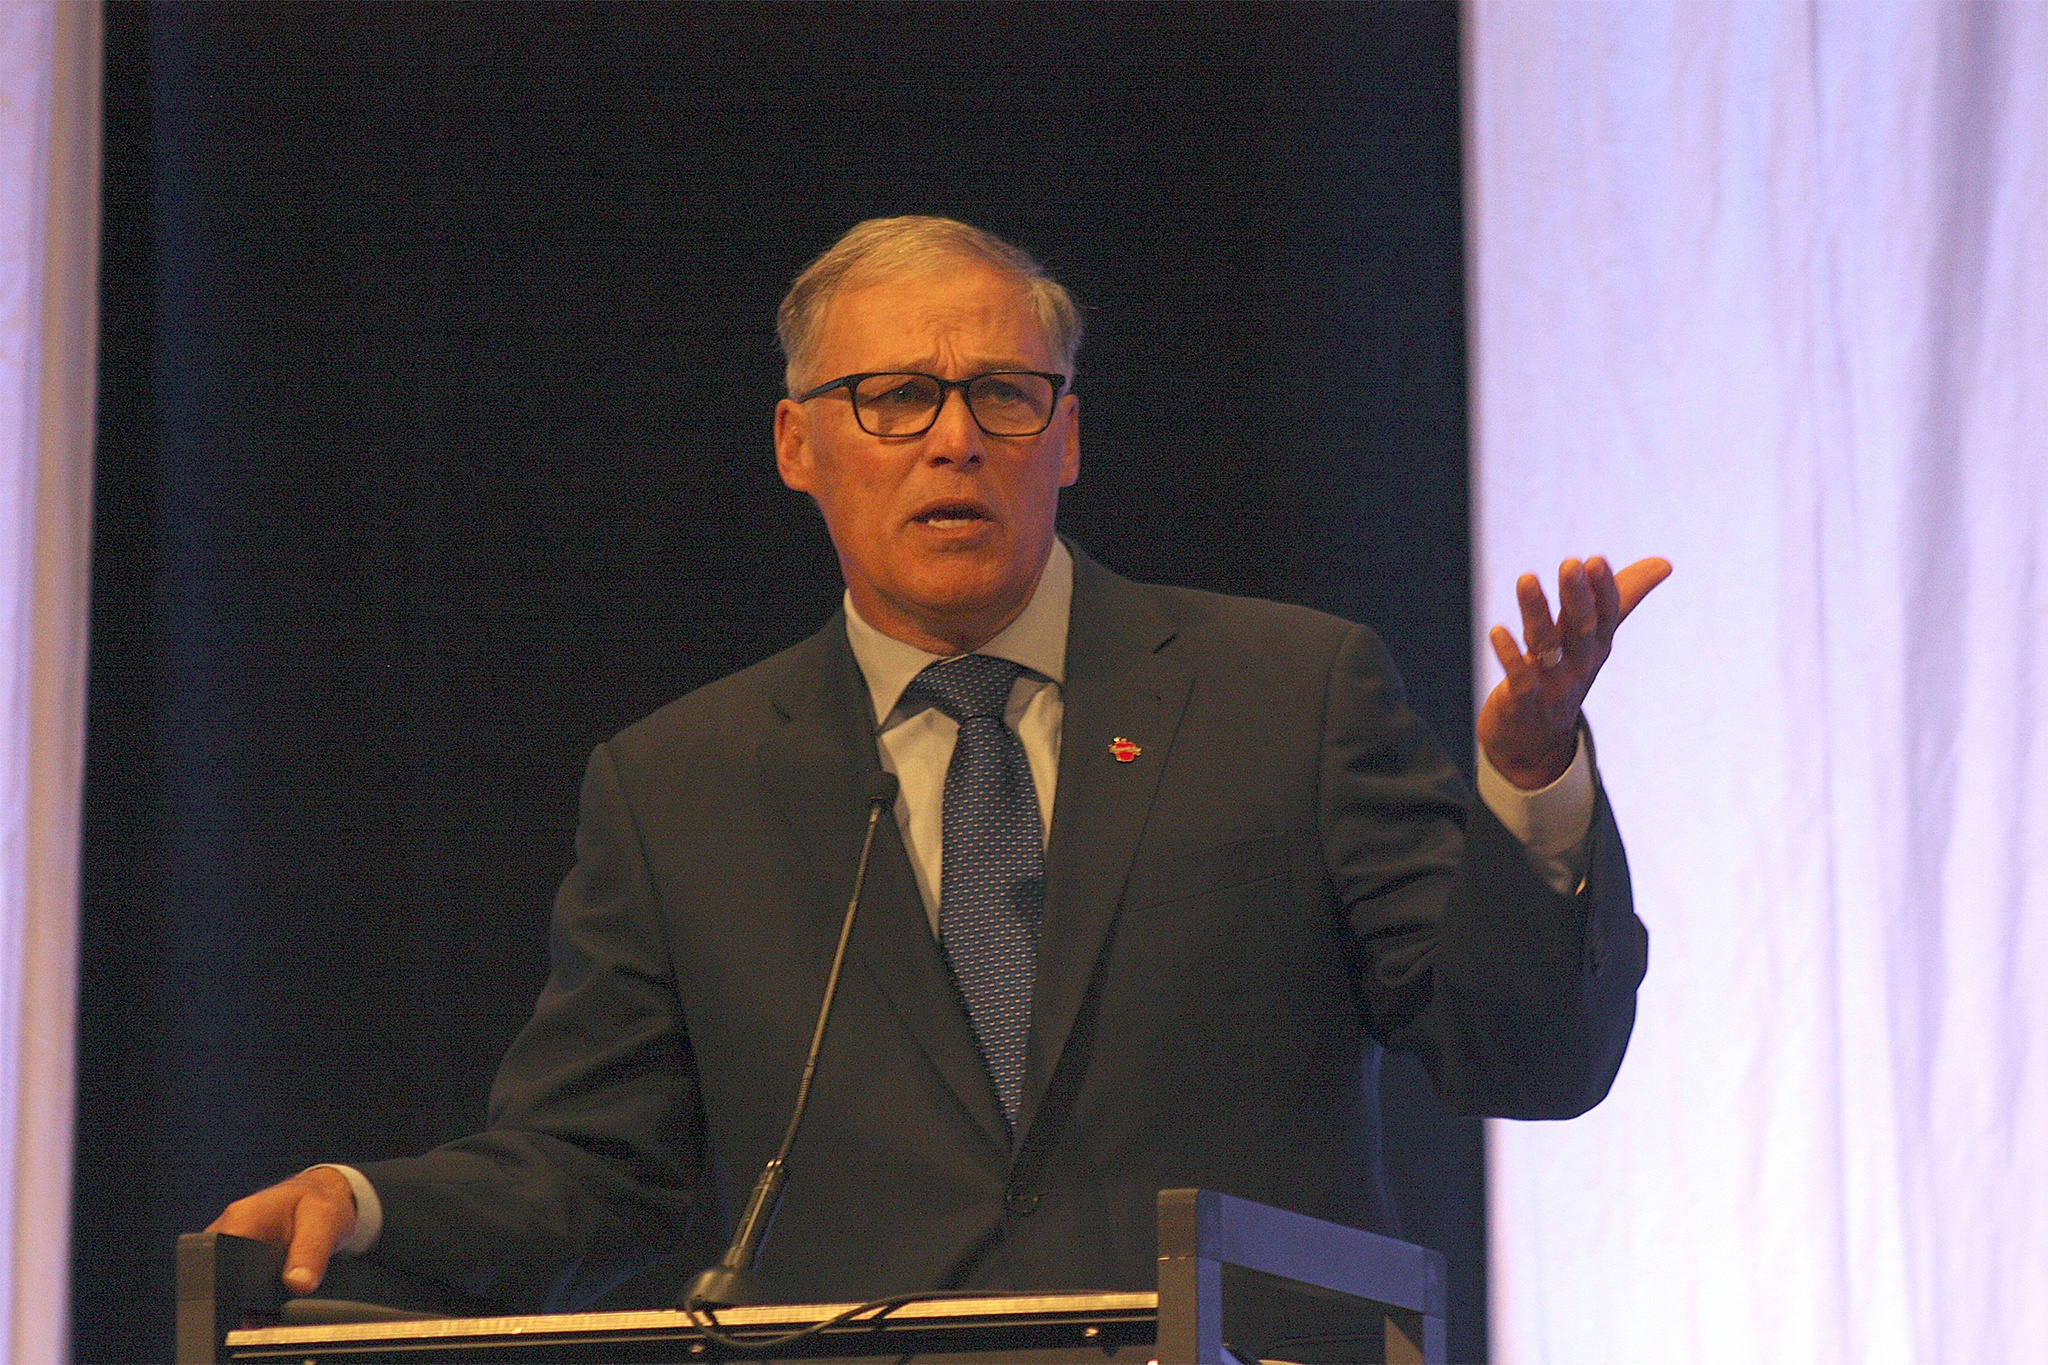 Washington Gov. Jay Inslee speaks about the need to build more homes in the state.